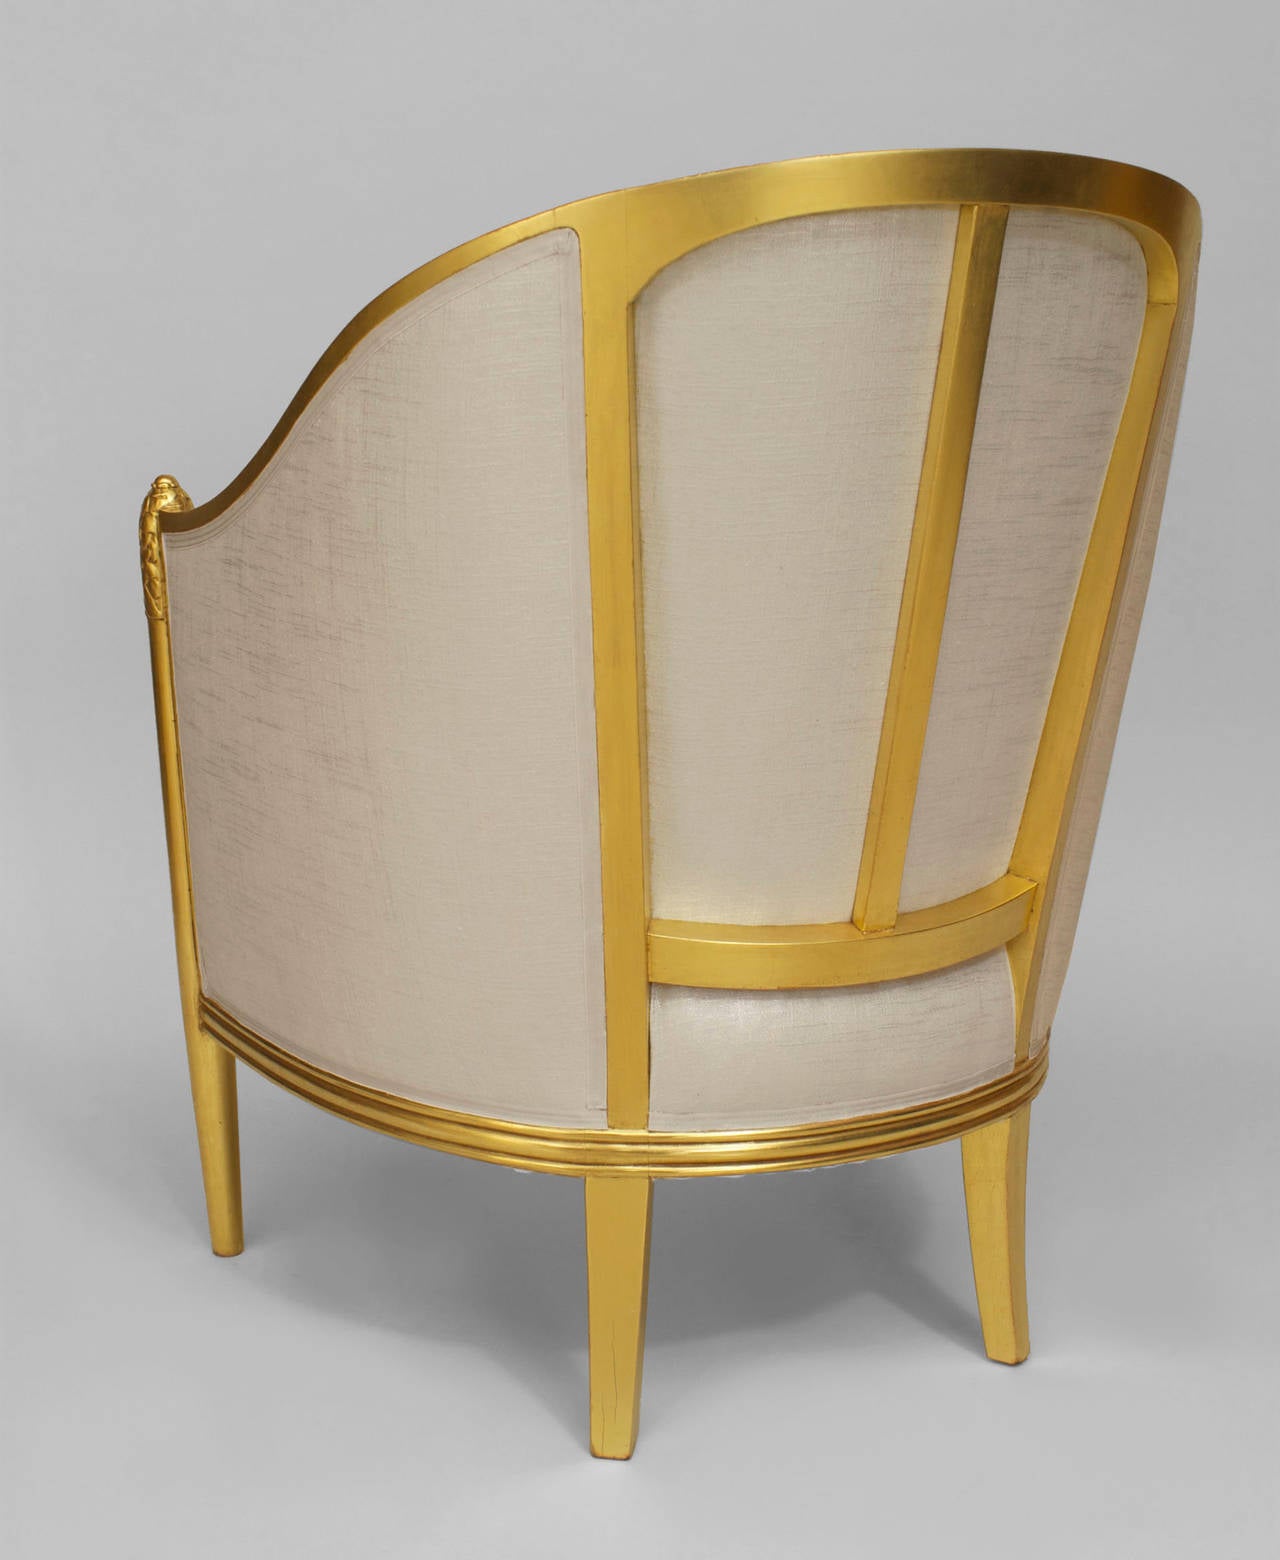 Two Pairs Of French Art Deco Club Chairs Attributed To Follet At 1stdibs